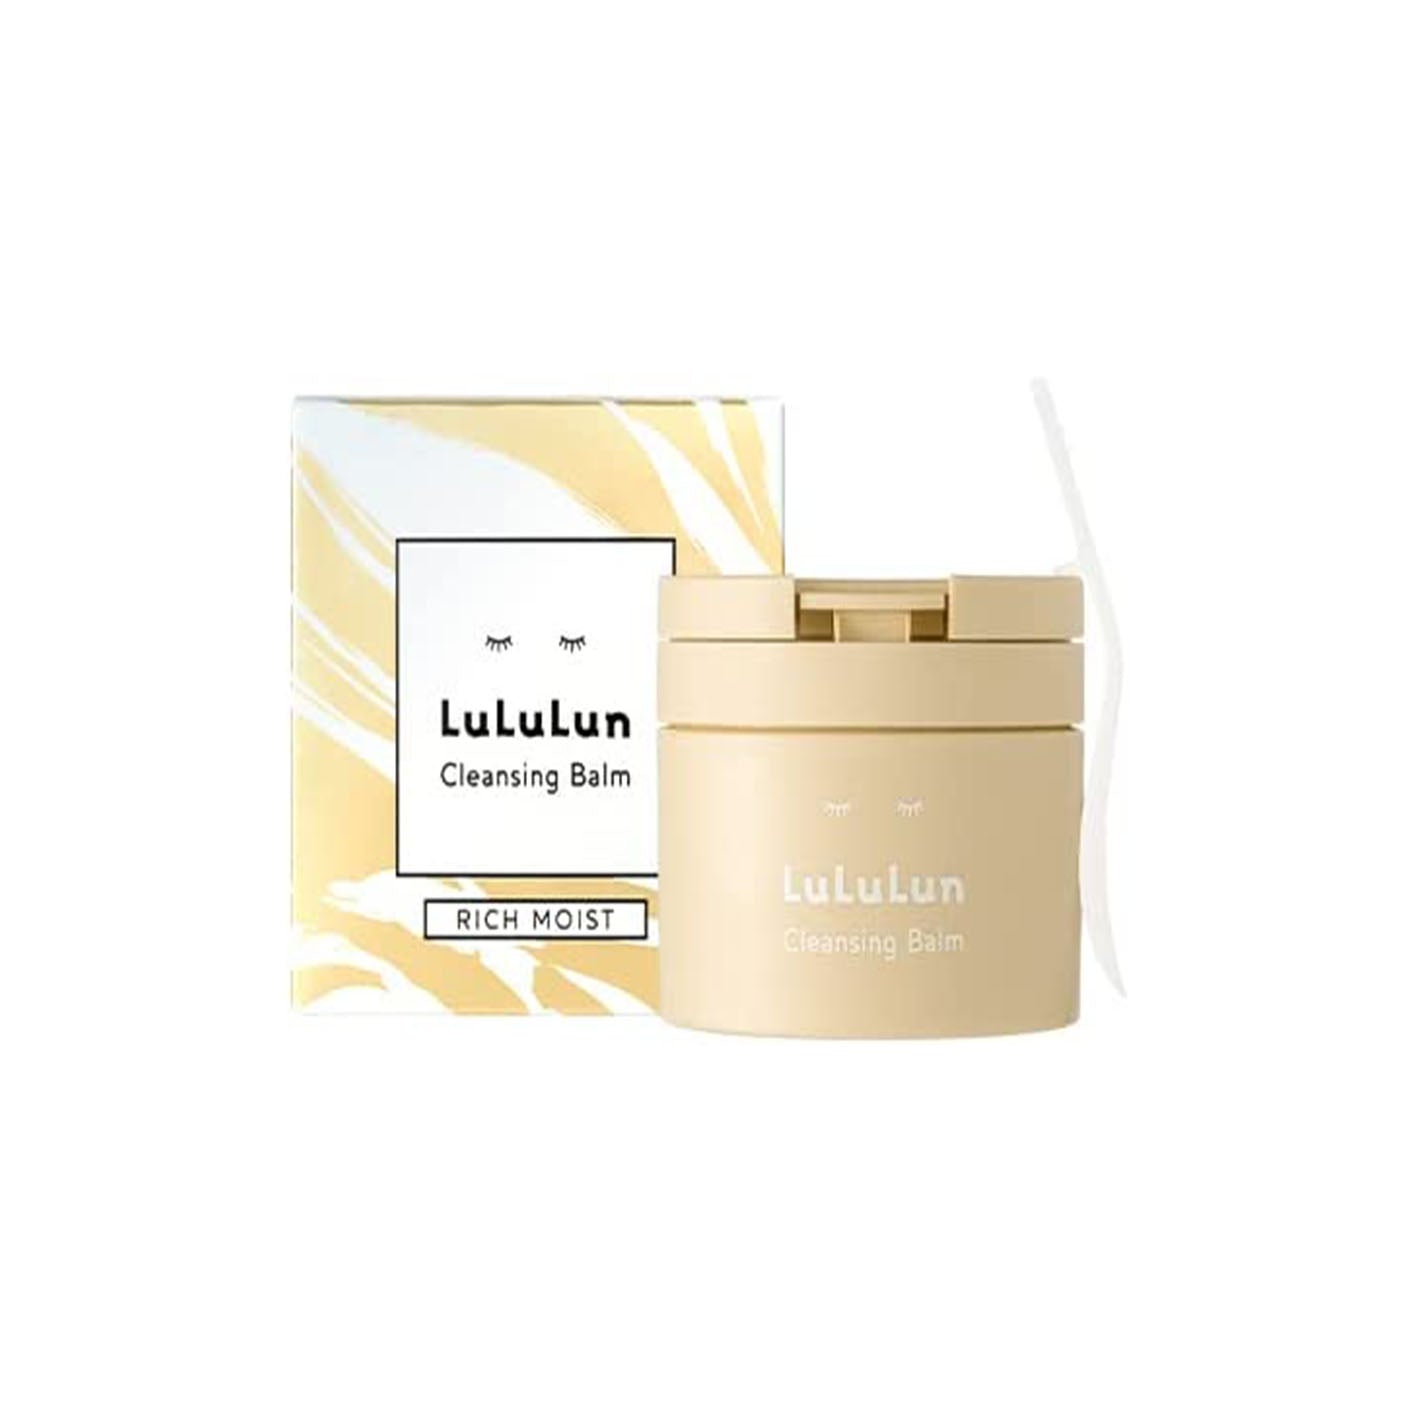 Lululun Cleansing Balm 90g - Rich Moist - Harajuku Culture Japan - Japanease Products Store Beauty and Stationery